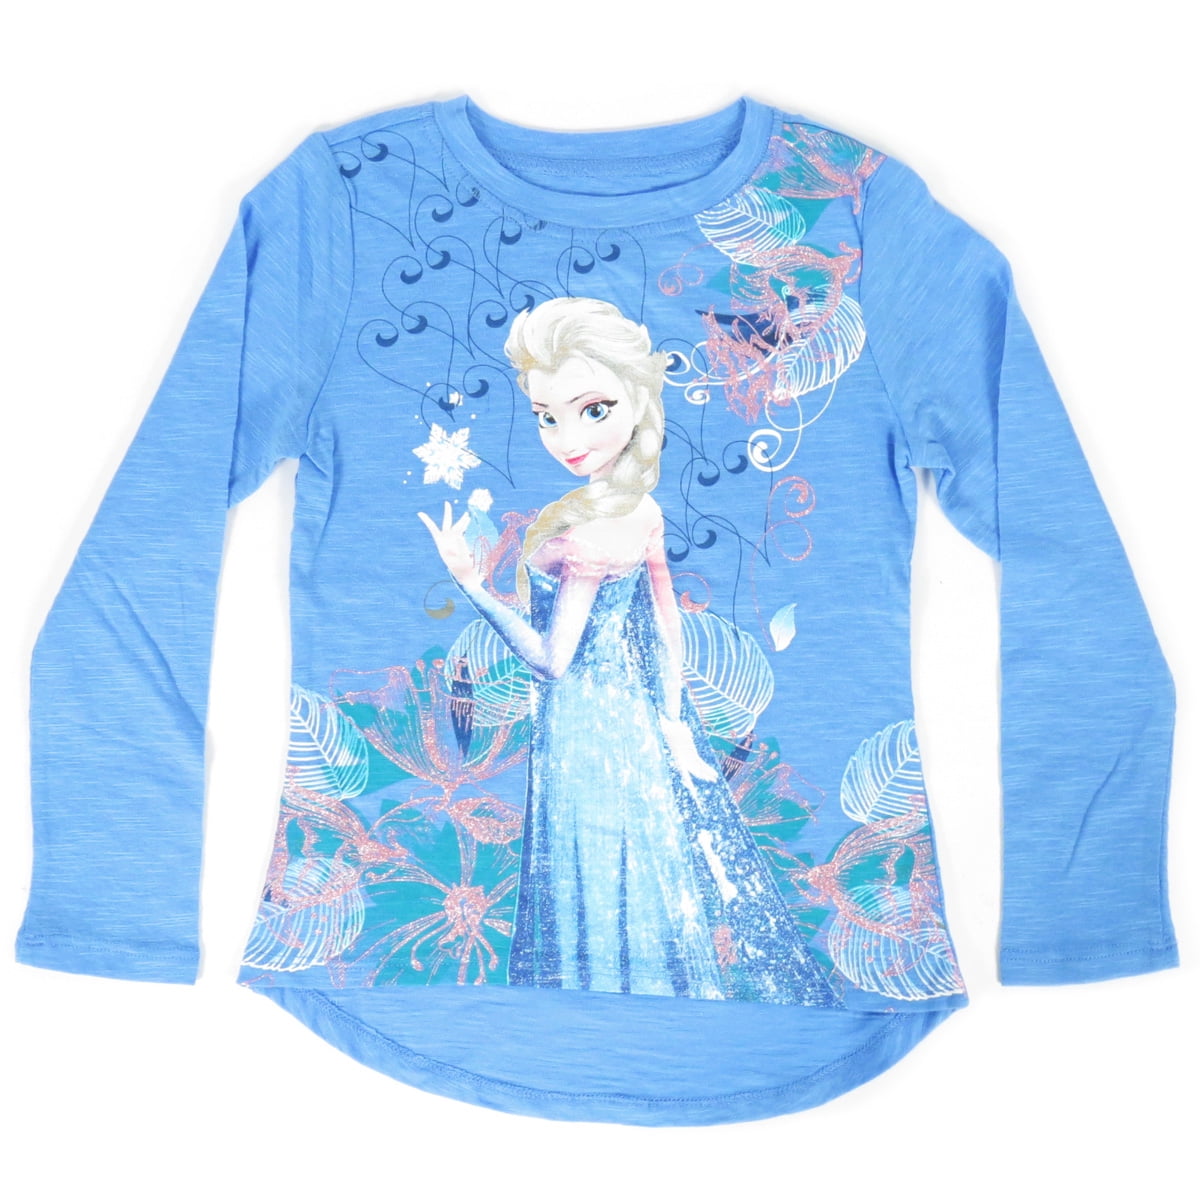 and 4T NWT Disney Frozen Blue Long Sleeve T-Shirt Toddler Girls Sizes 2T 3T 